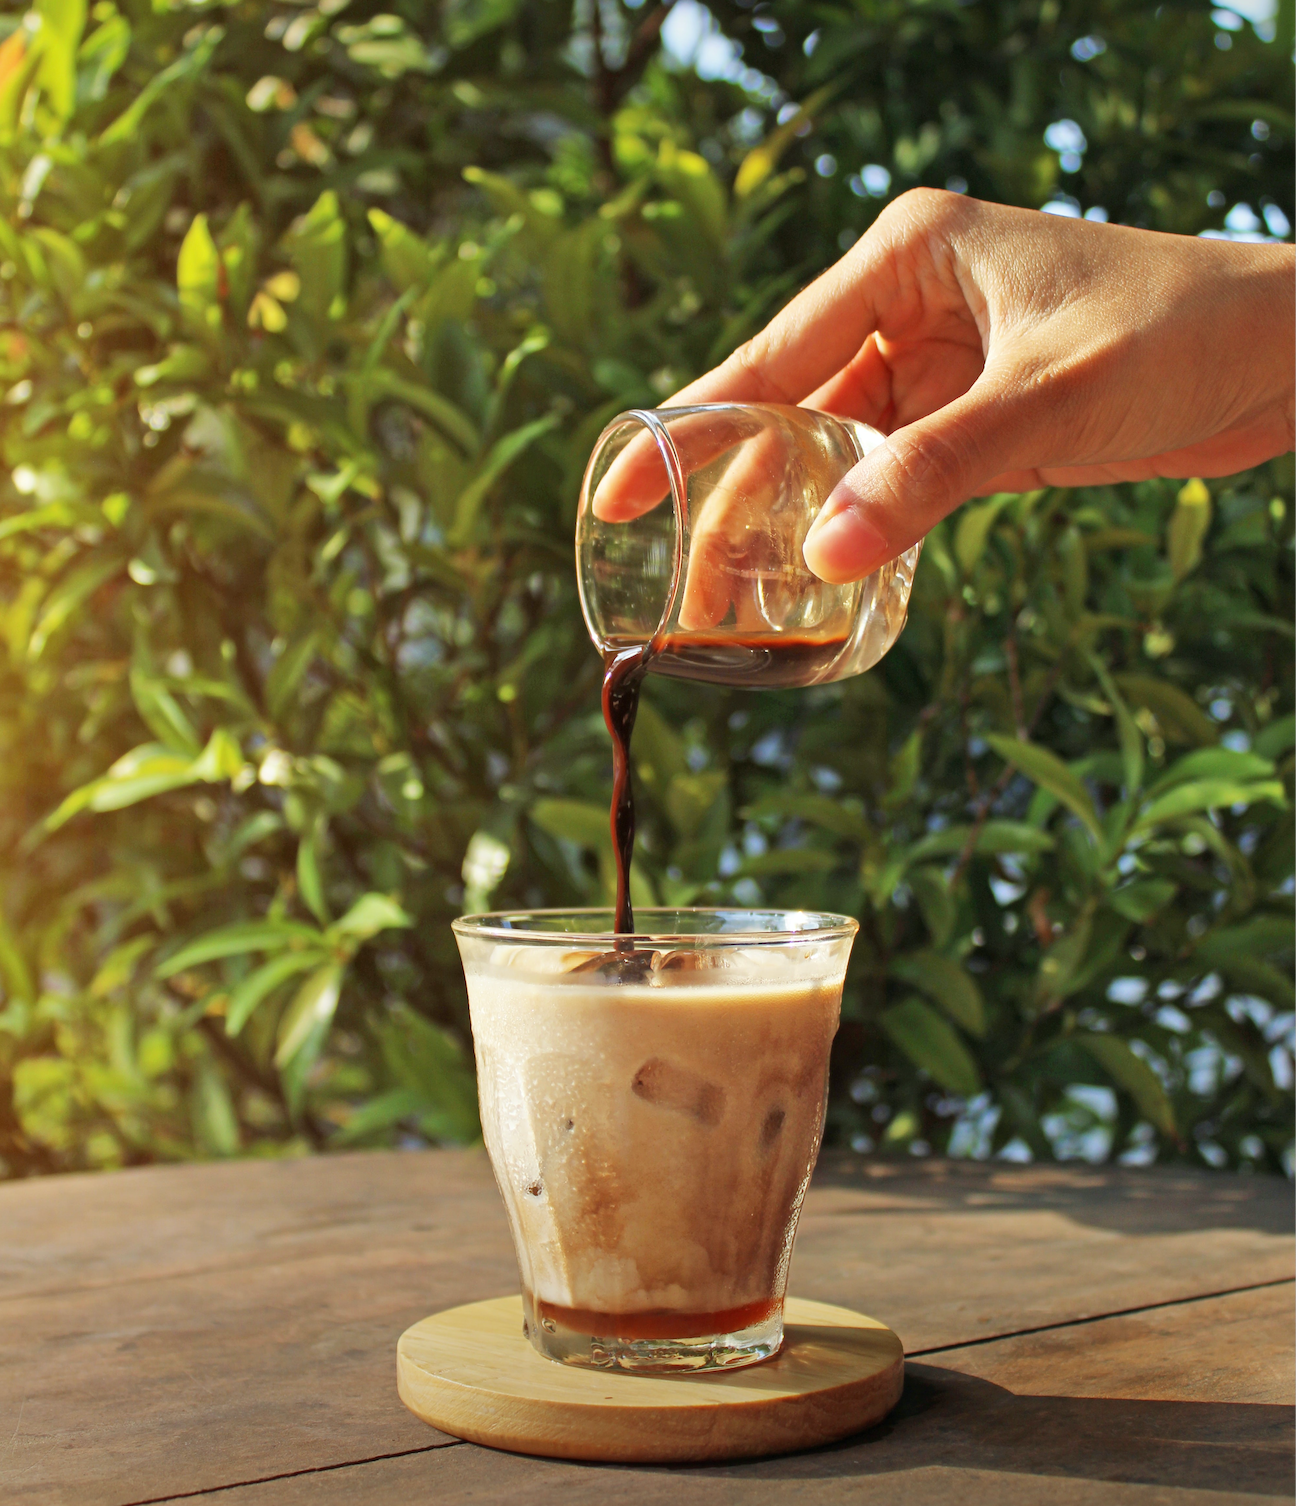 Summer of Slurps: Our top 5 picks for a refreshing coffee beverage in the July heat